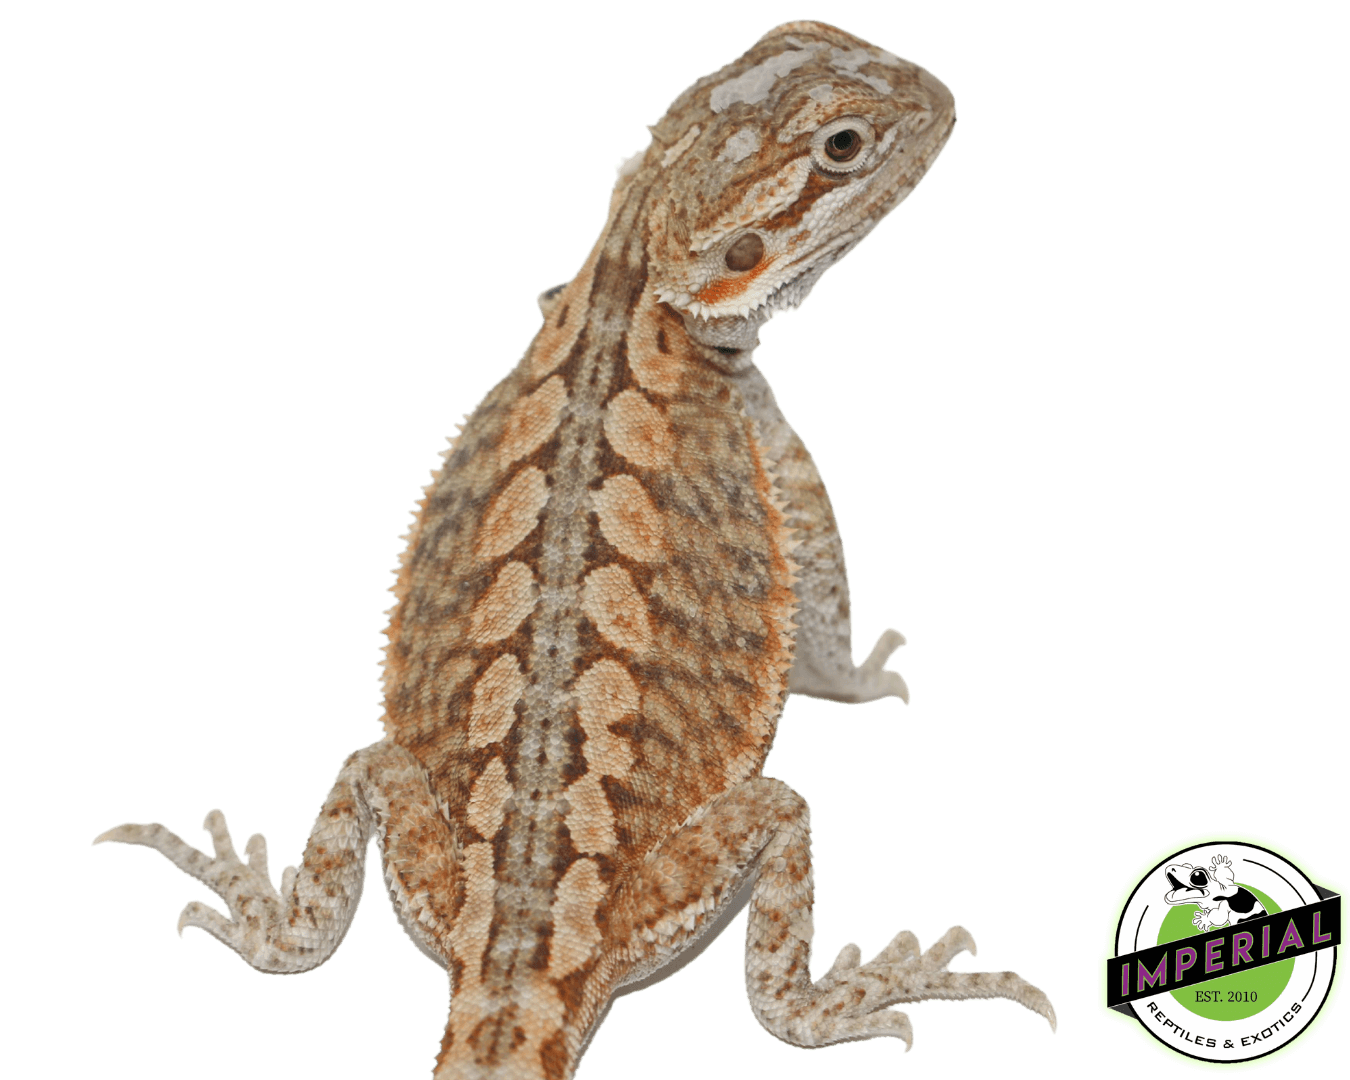 hypo snow leatherback bearded dragon for sale, buy reptiles online